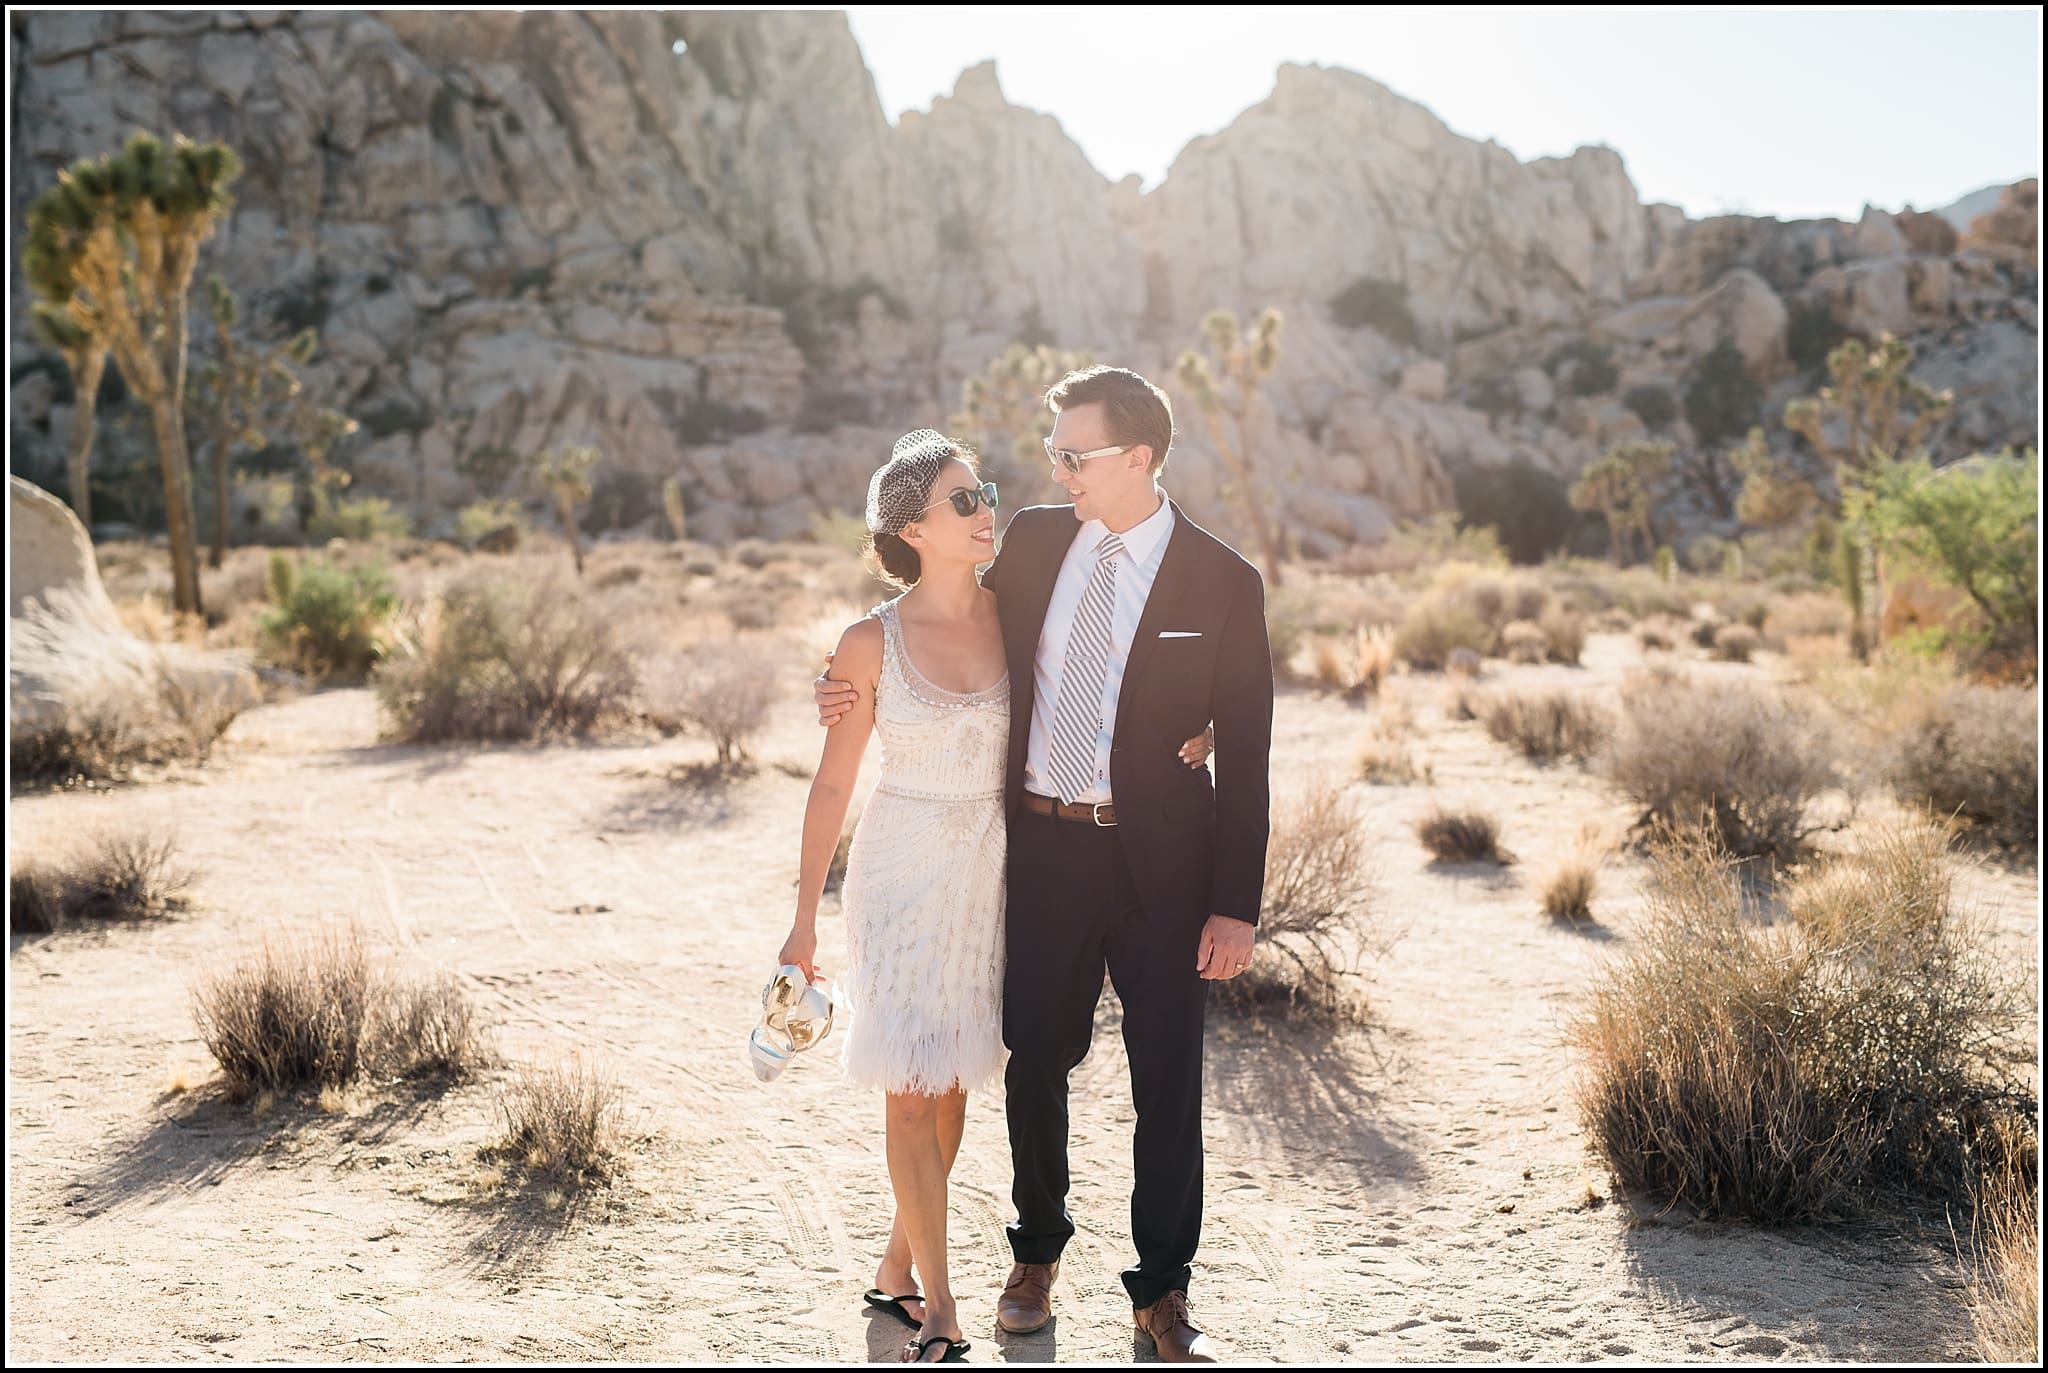  favorite wedding images 2016, wedding photos from 2016, our favorite wedding photos, joshua tree wedding photos